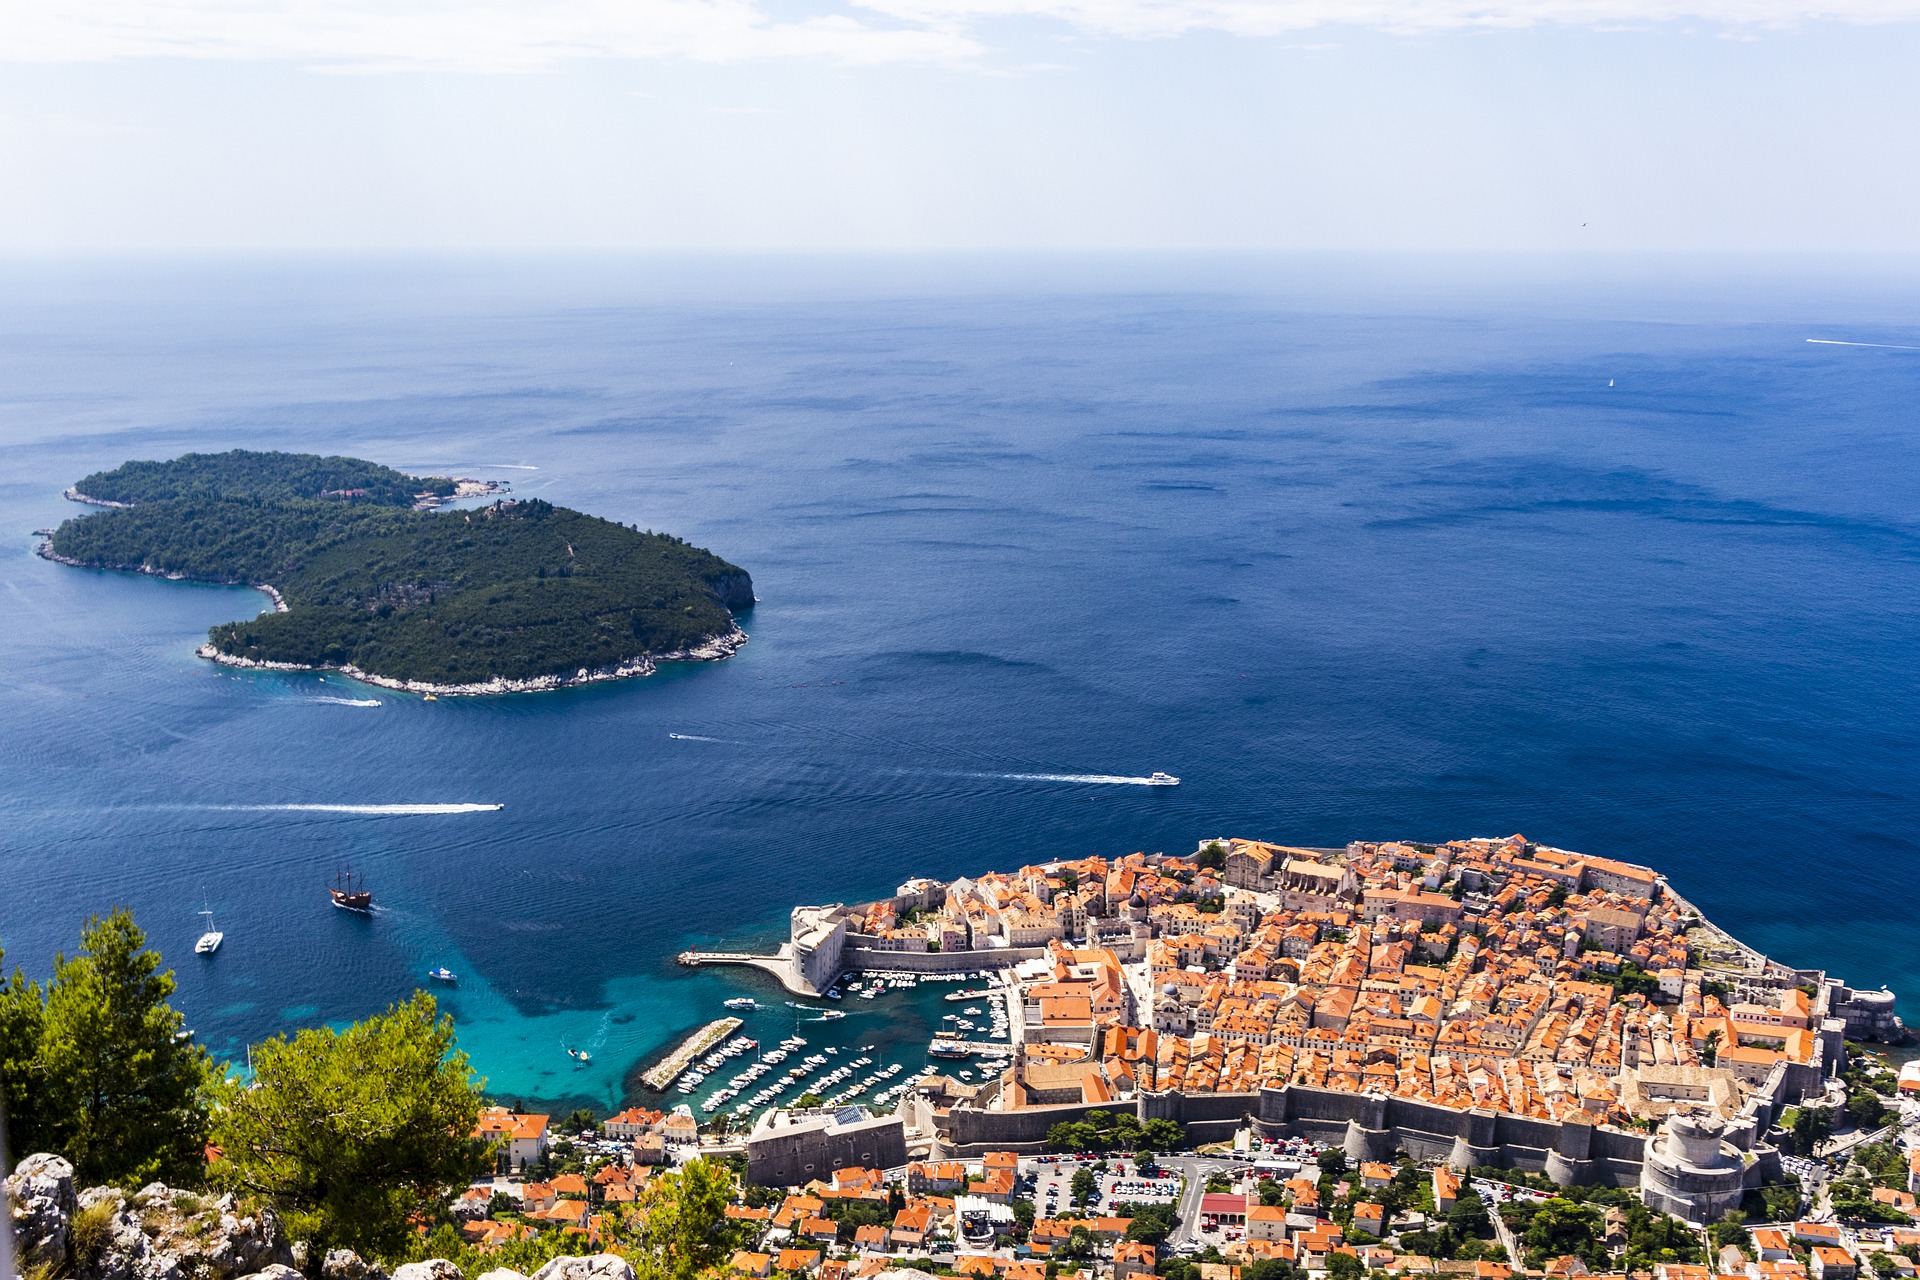 Luxury yacht charters in Dubrovnik are full of natural beauty and history